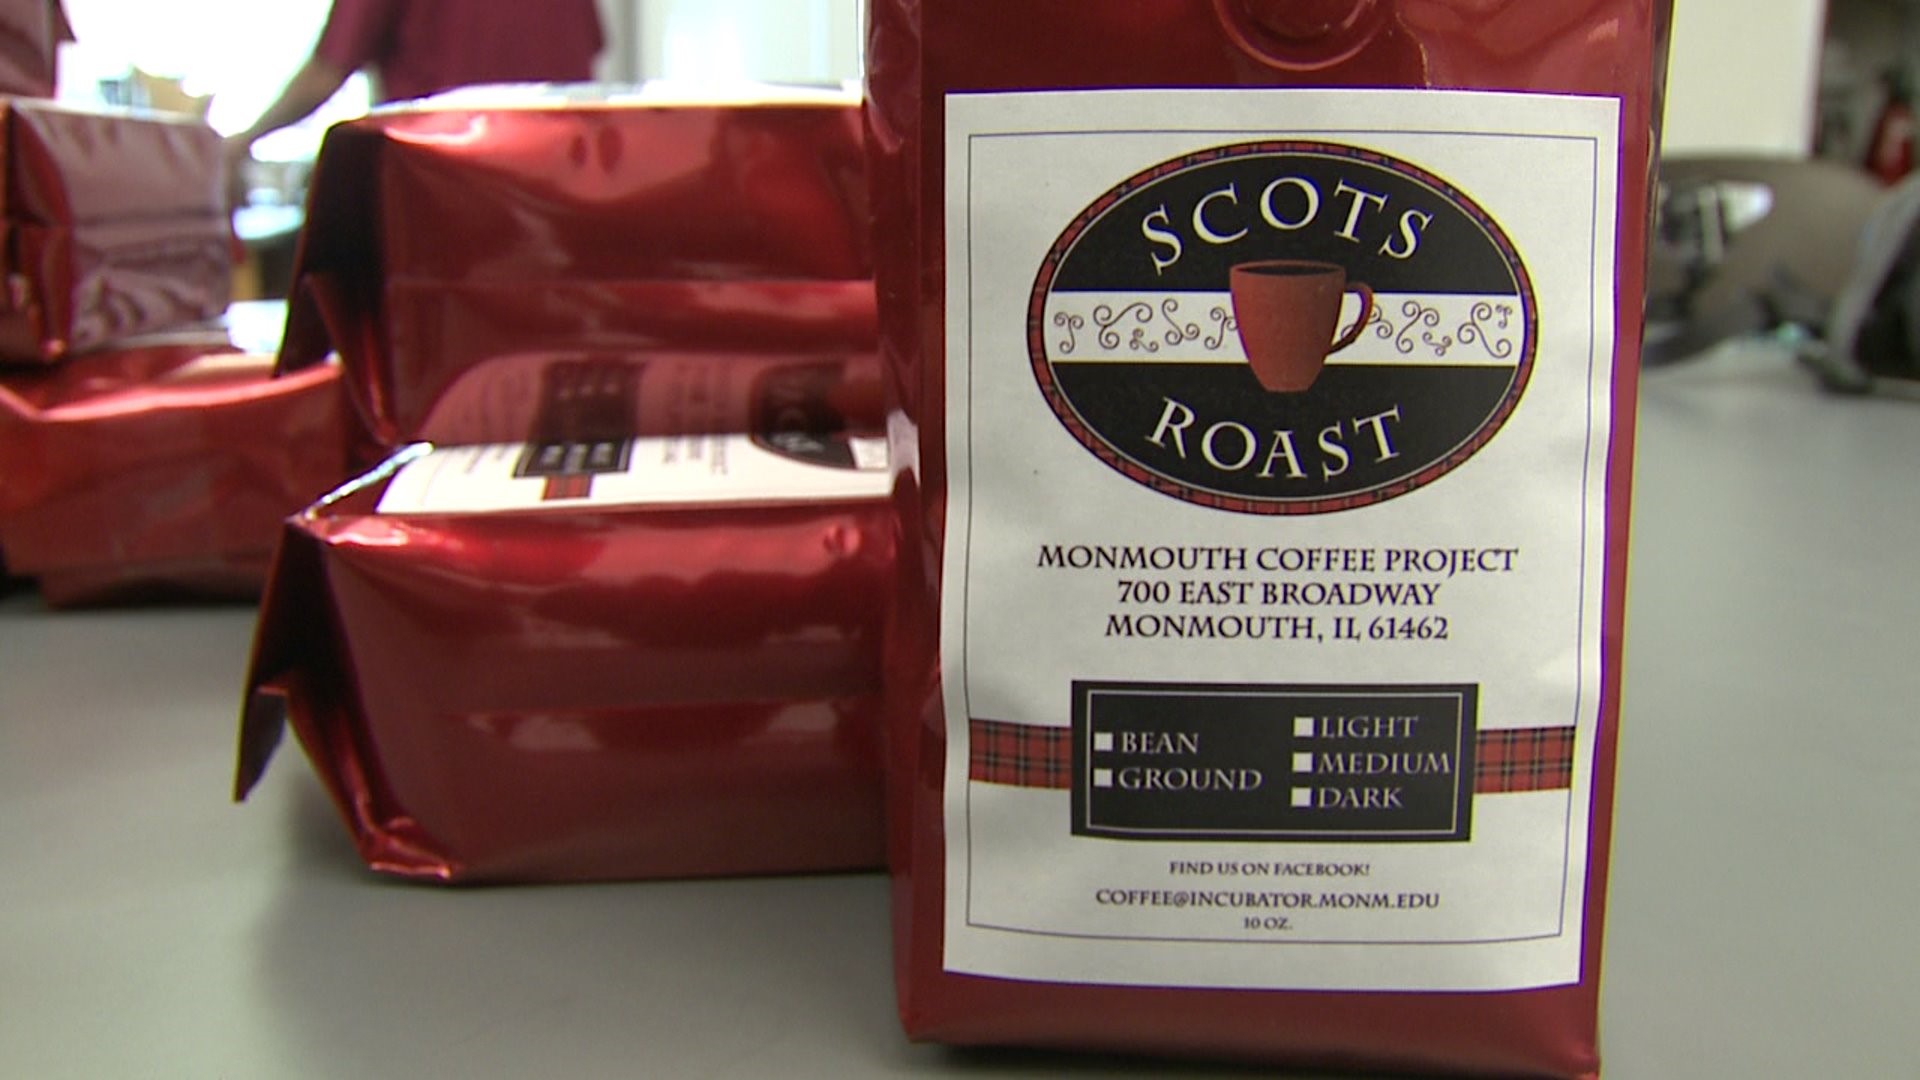 Monmouth College makes their own `Scots Coffee` on campus